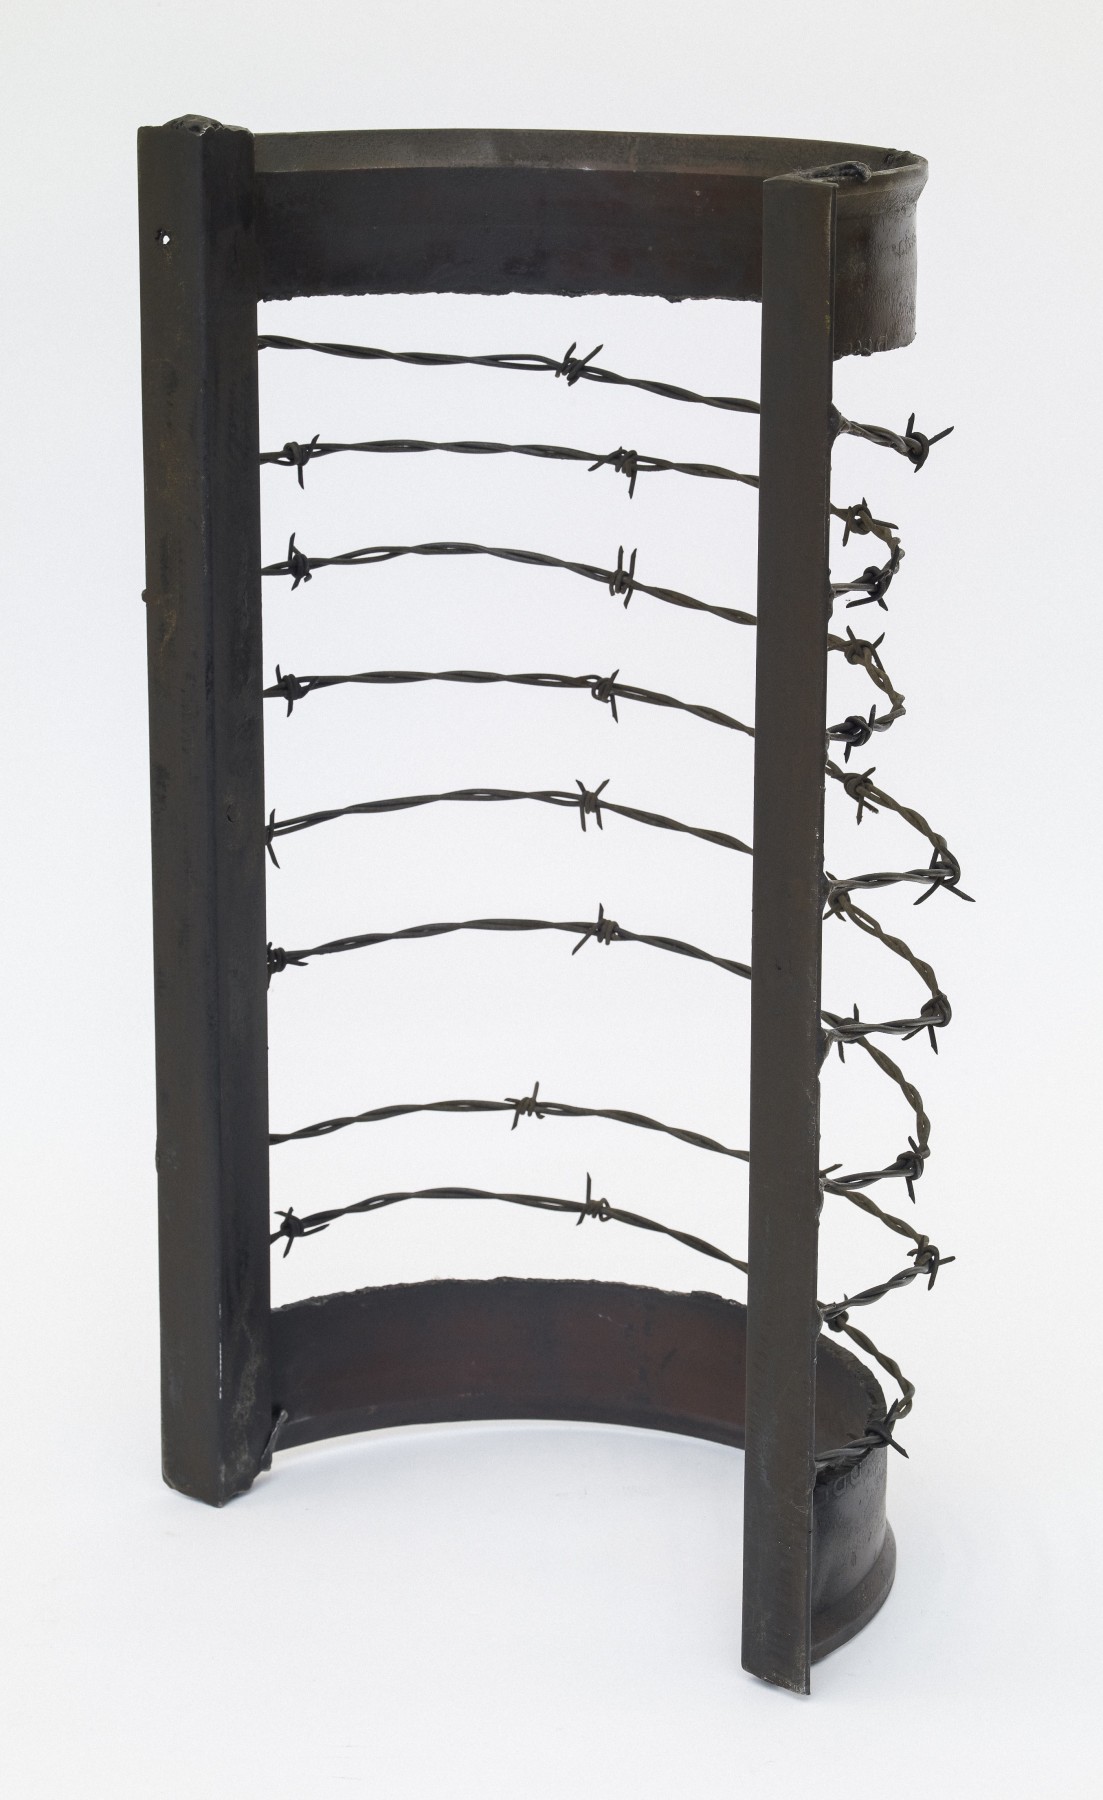 Upright, 1974, Welded steel and barbed wire